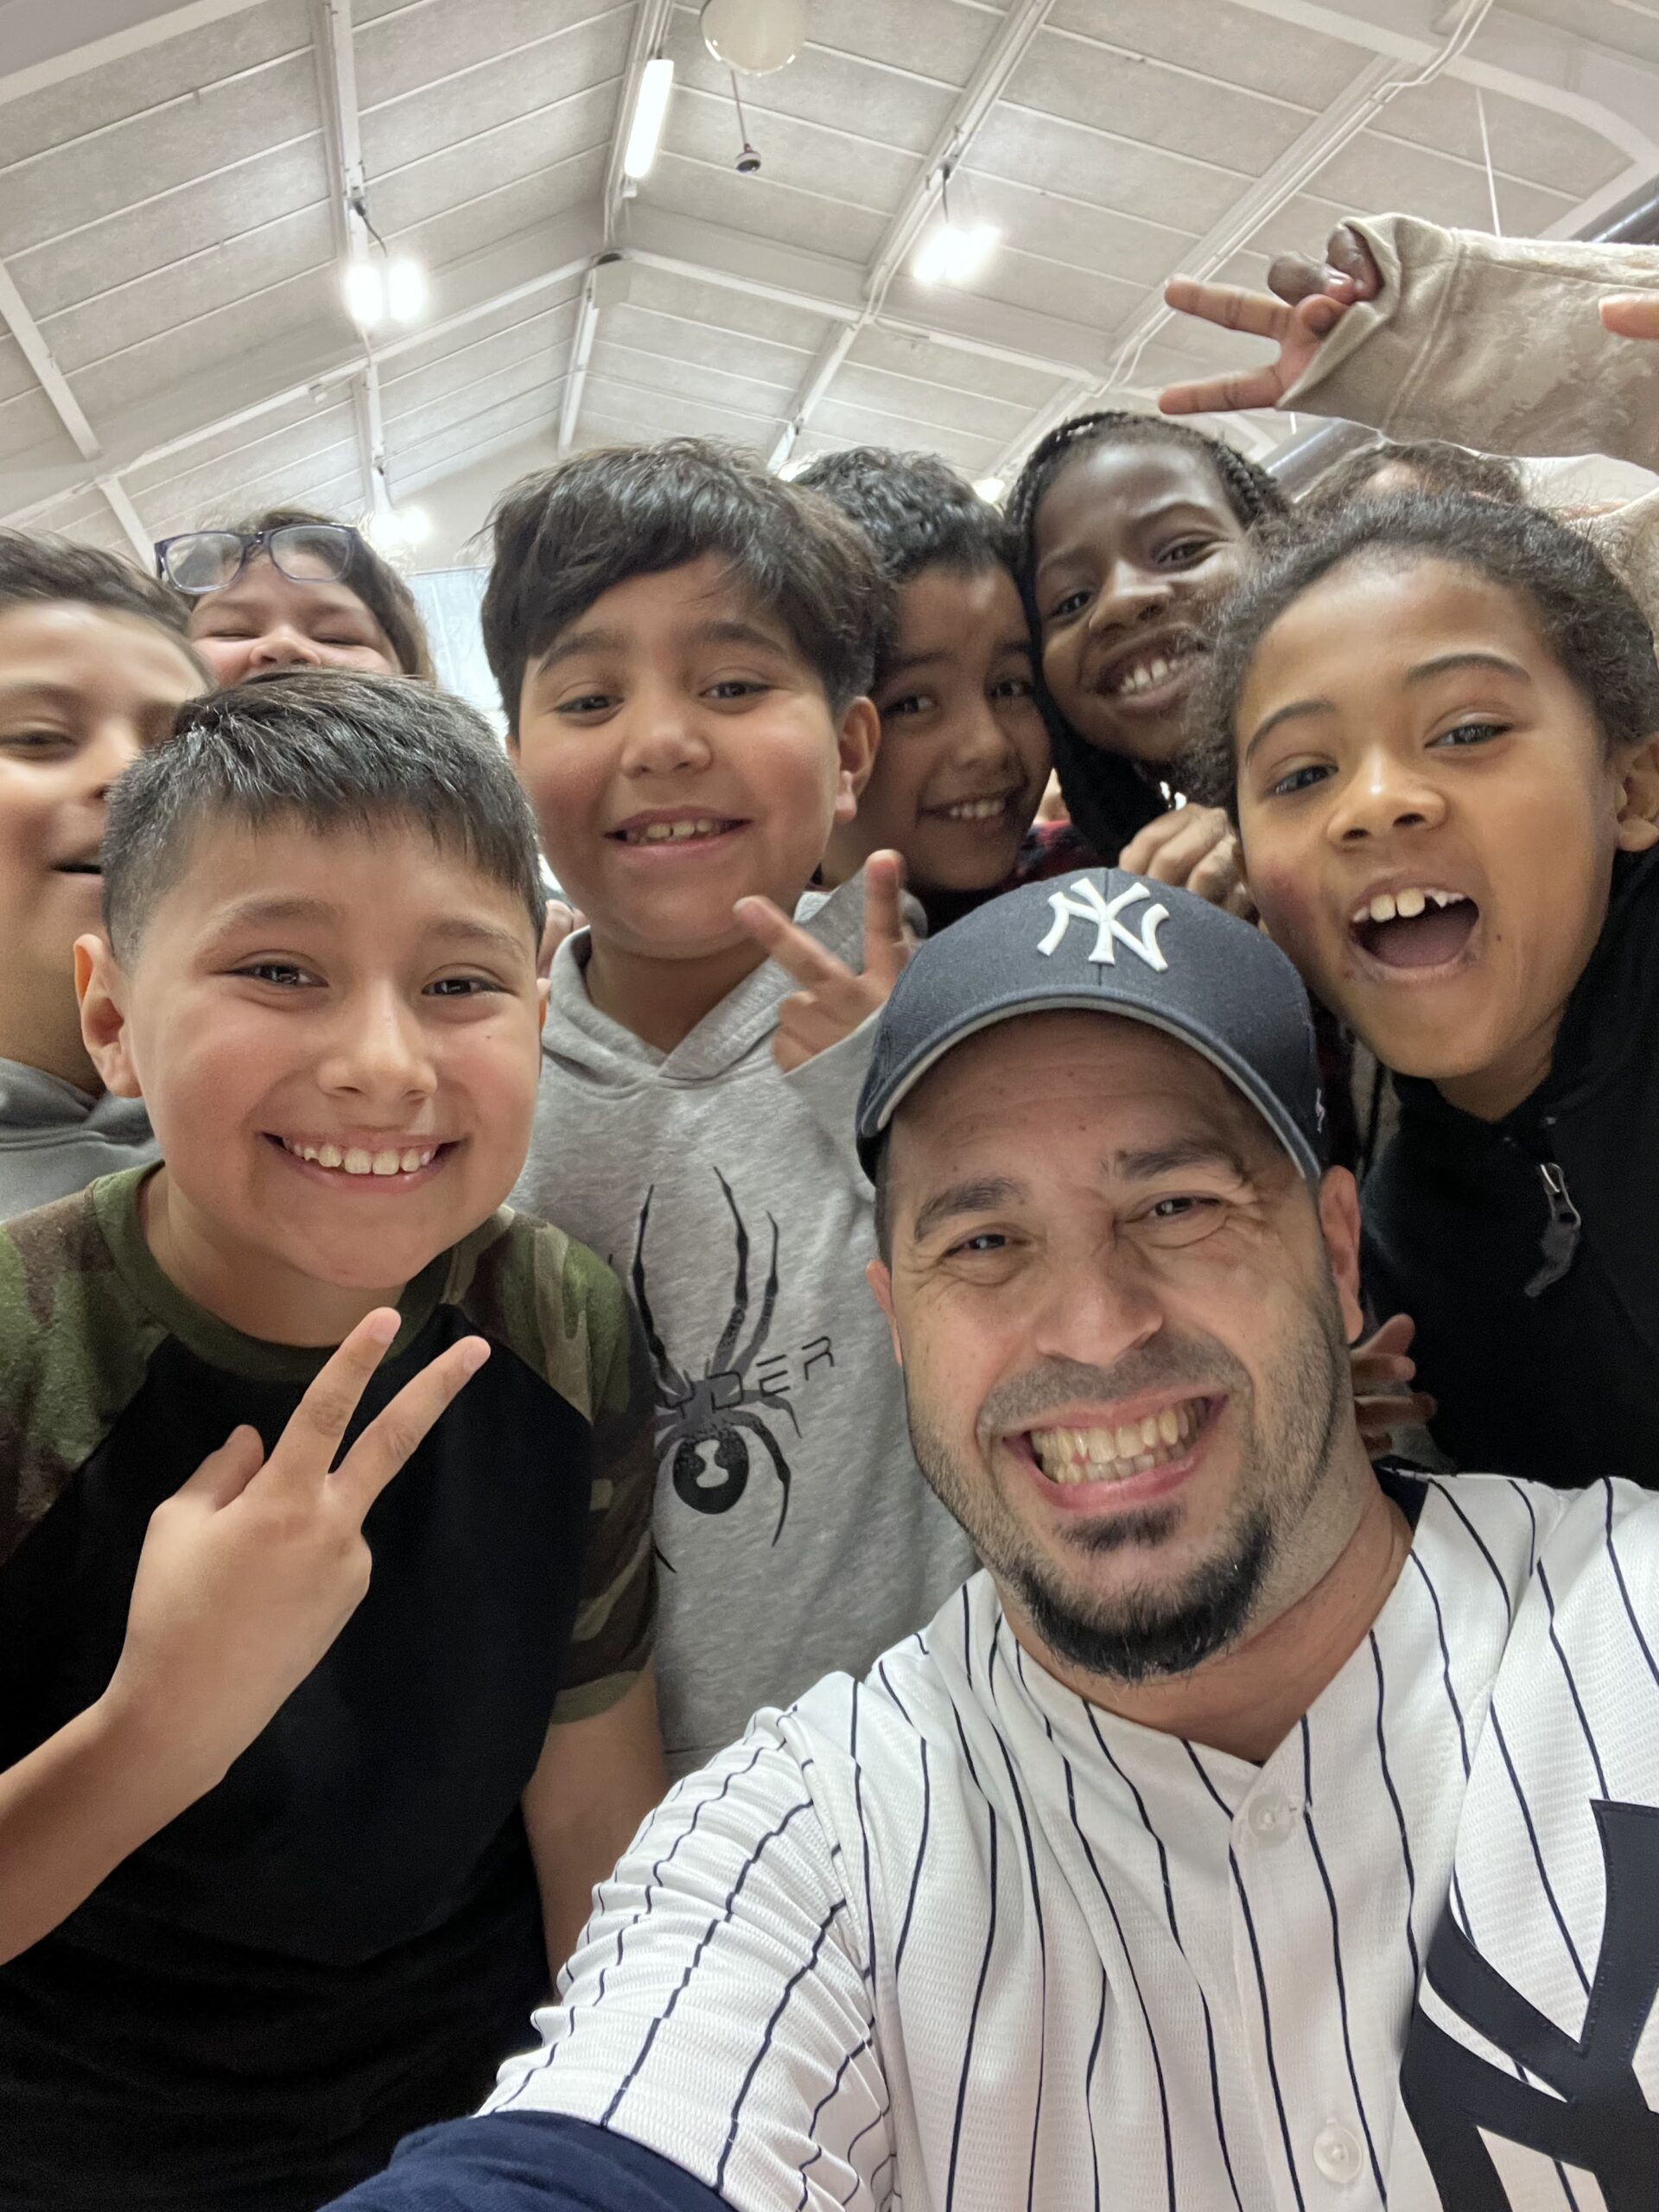 Eddie Cortes at West Gate Elementary School in VA with Students